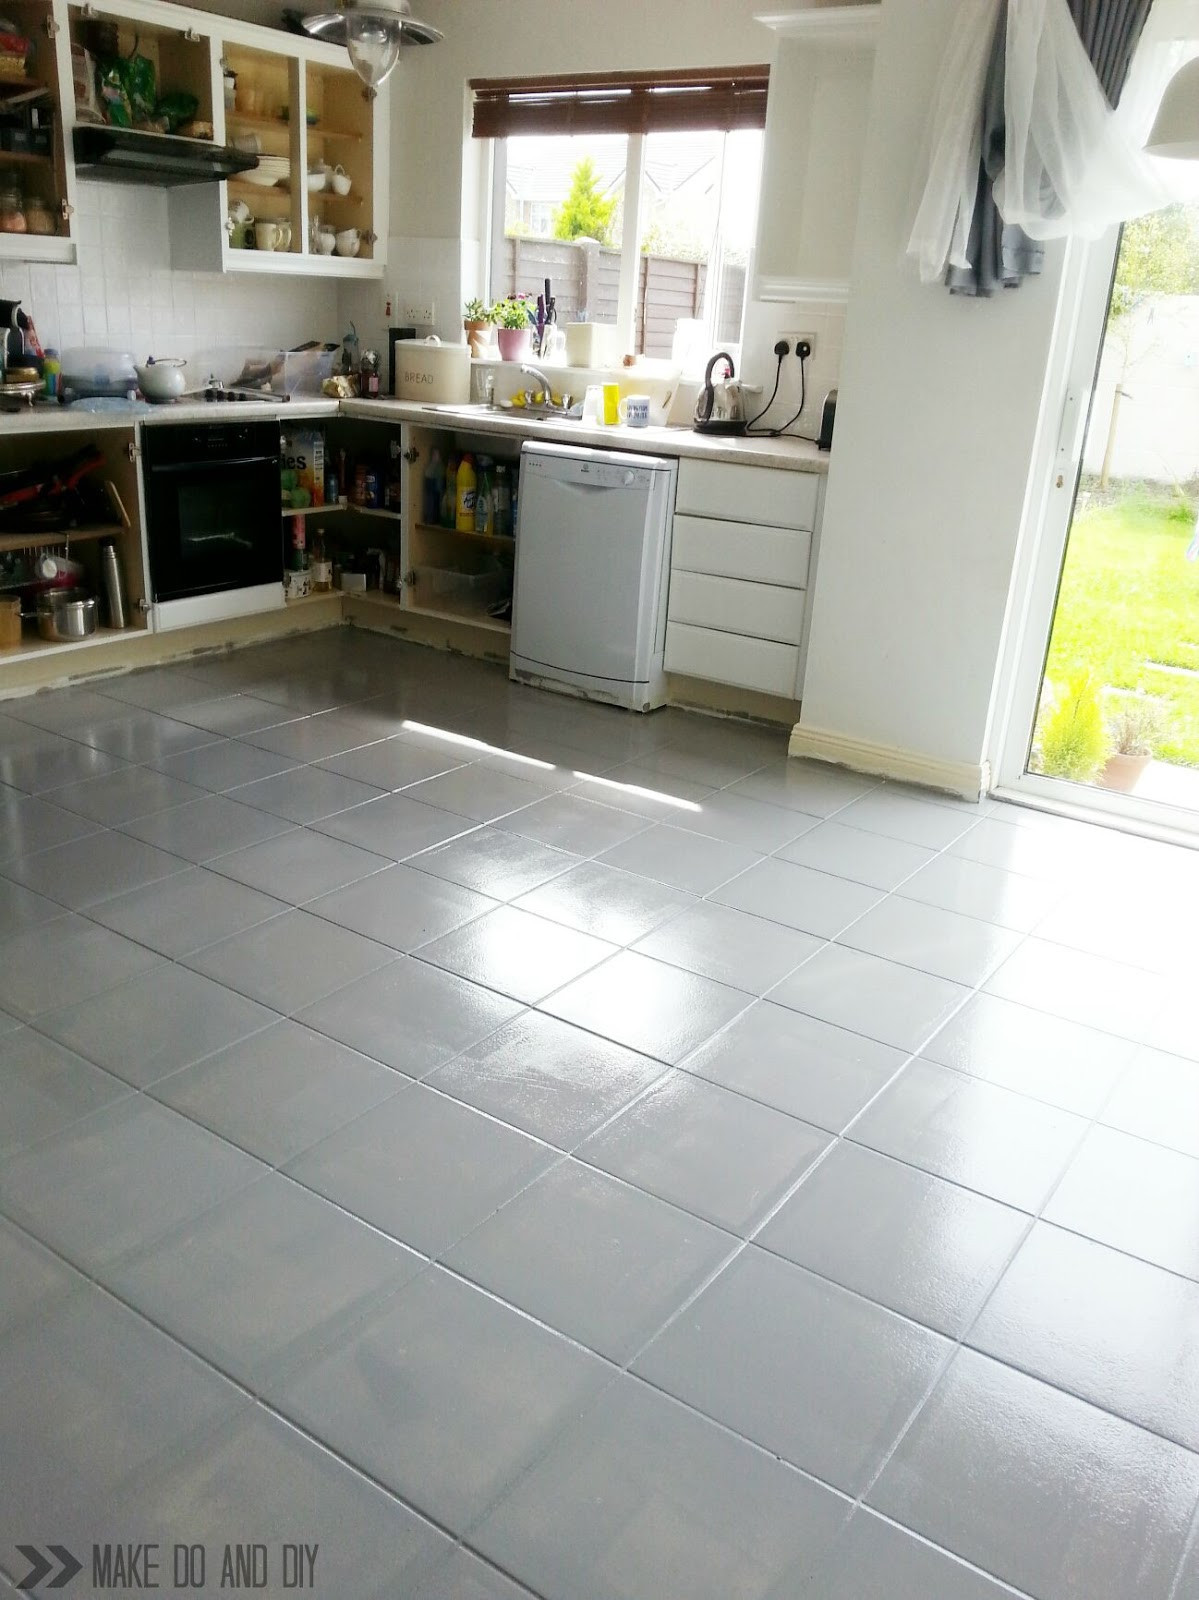 Painted Kitchen Floor Tiles Elegant Painted Tile Floor No Really Make Do And Diy Of Painted Kitchen Floor Tiles 